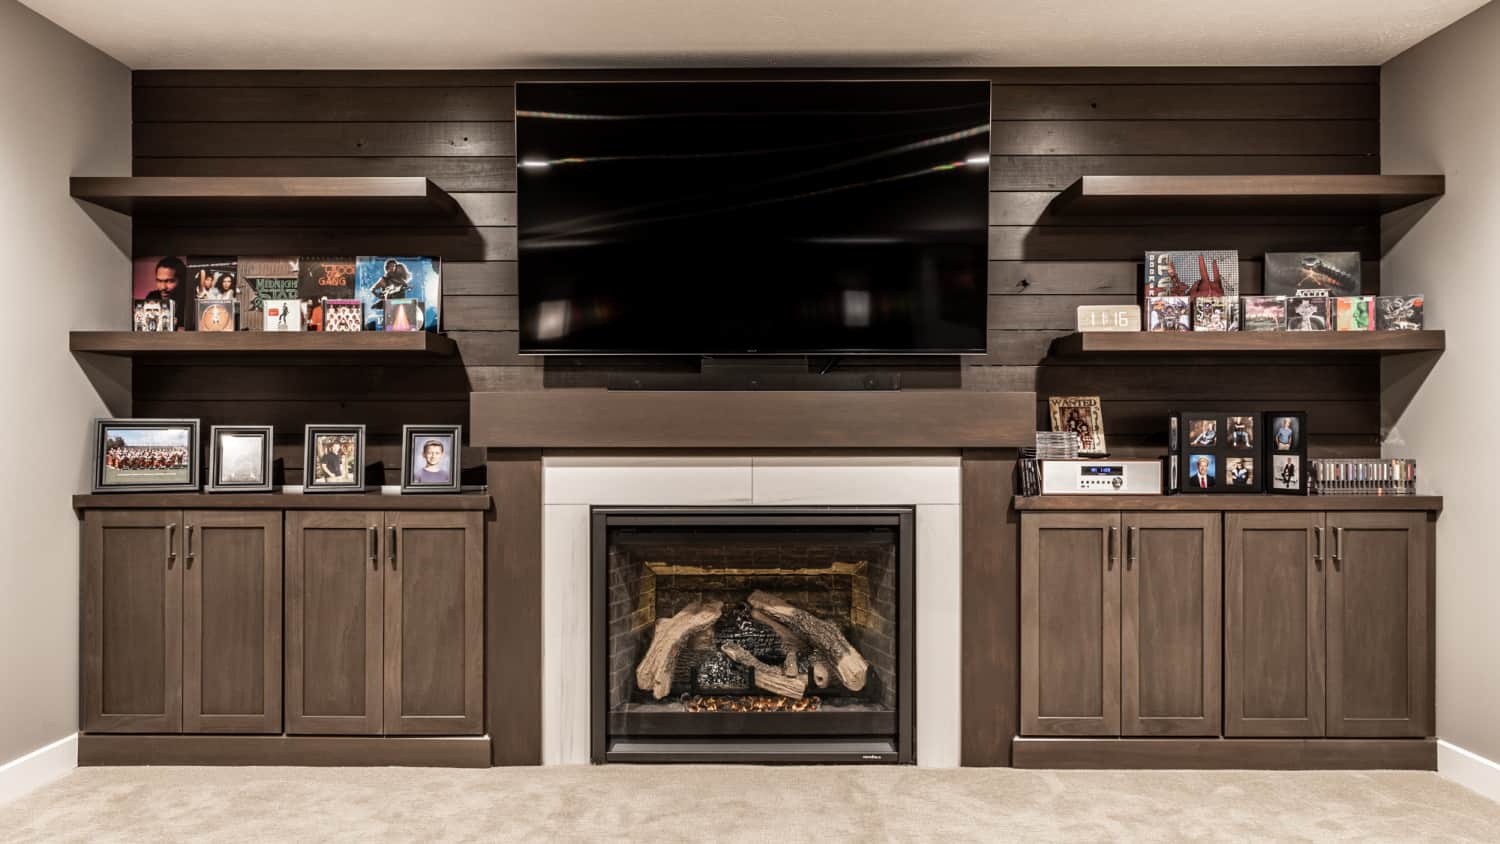 Nicholas Design Build | A living room with a fireplace and tv.